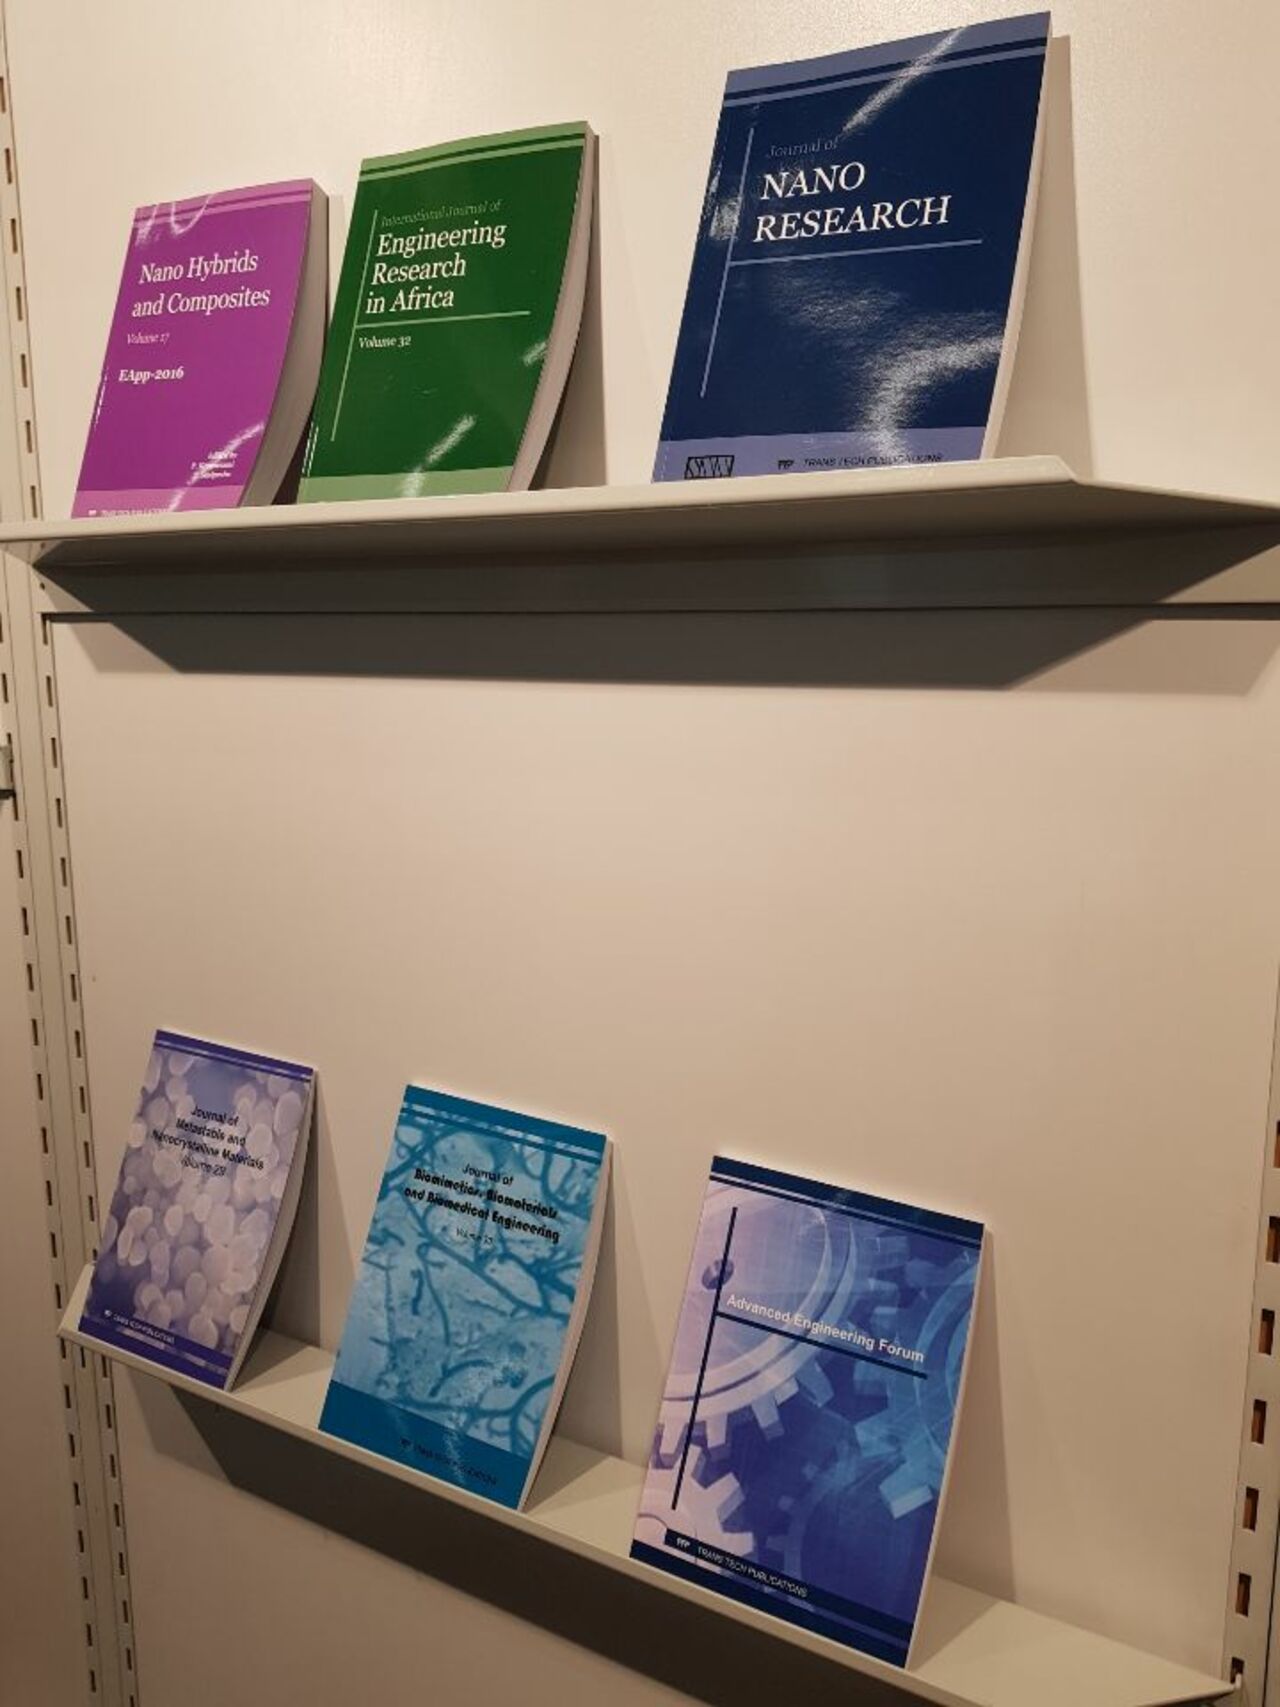 New wonderful day at the @Book_Fair with specialized collections on #engineering themes from http://Scientific.Net#Scientific_Net #fbm17 https://t.co/fA2lezqplJ